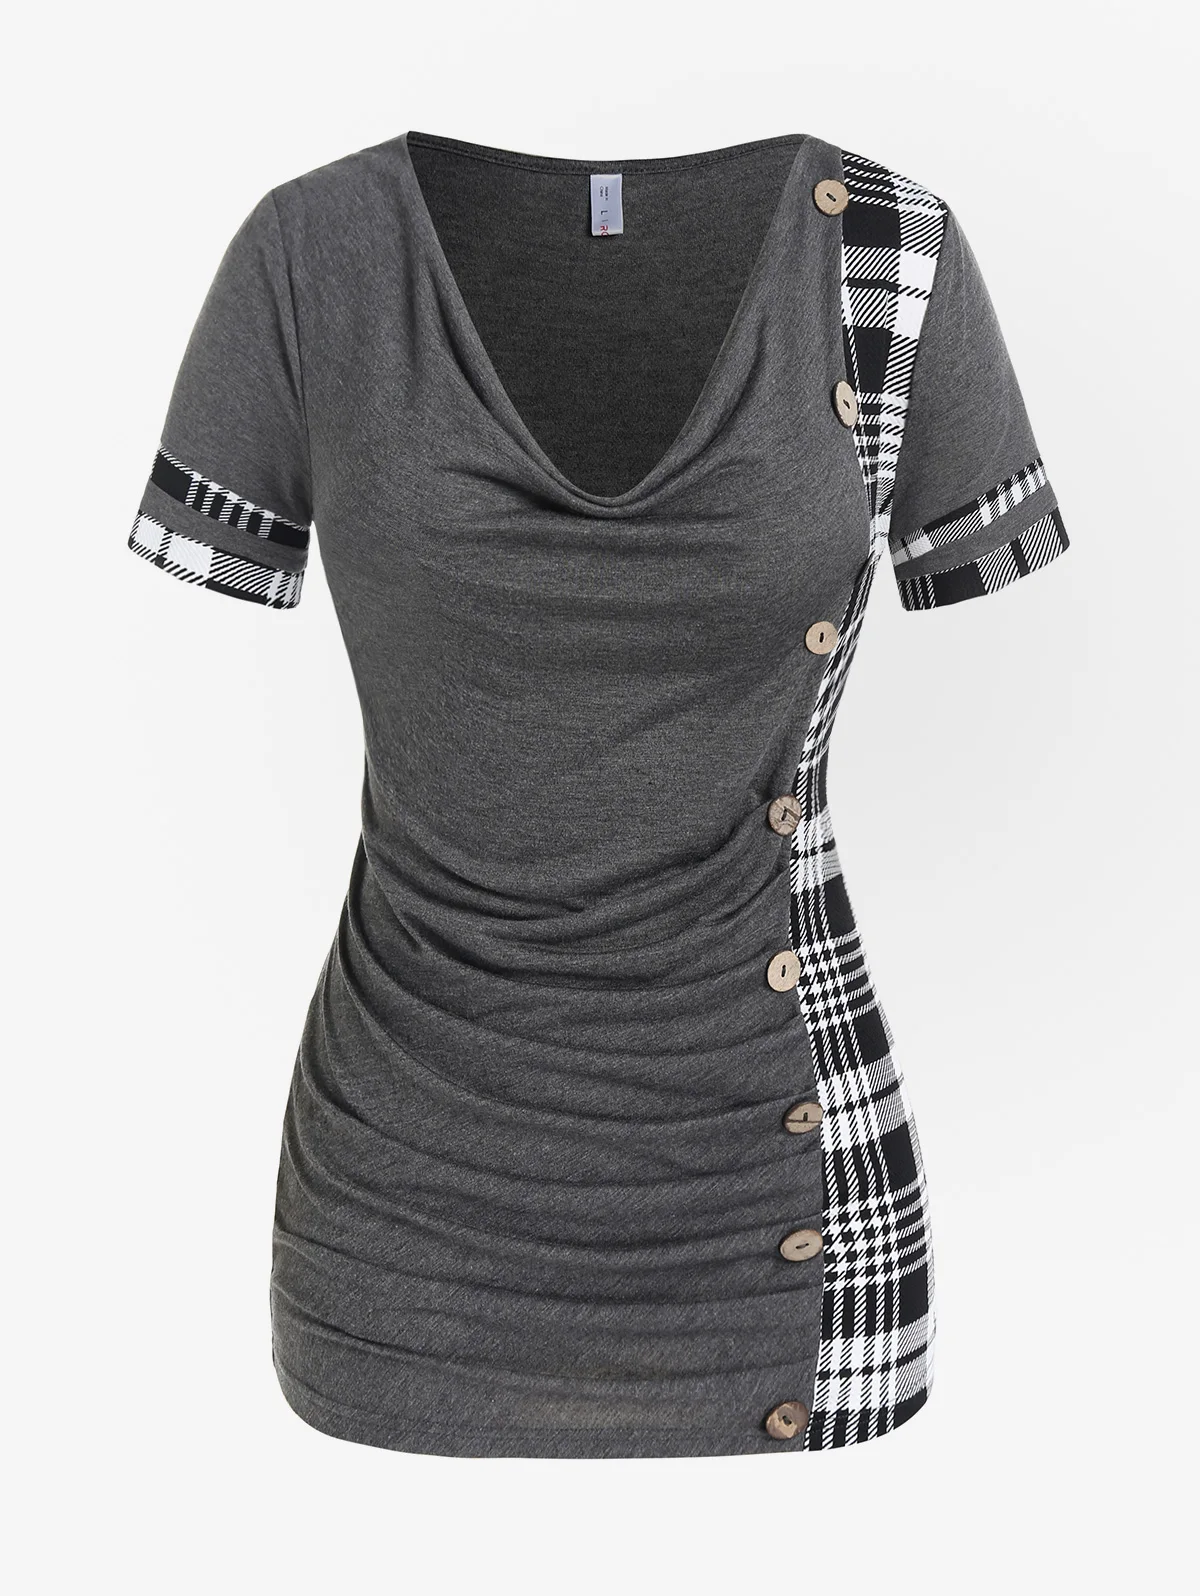 

ROSEGAL Cowl Neck T-Shirt With Buttons Ladies Plaid Ruched Short Sleeve Casual Blouson Top Elastic Women Tee Gray